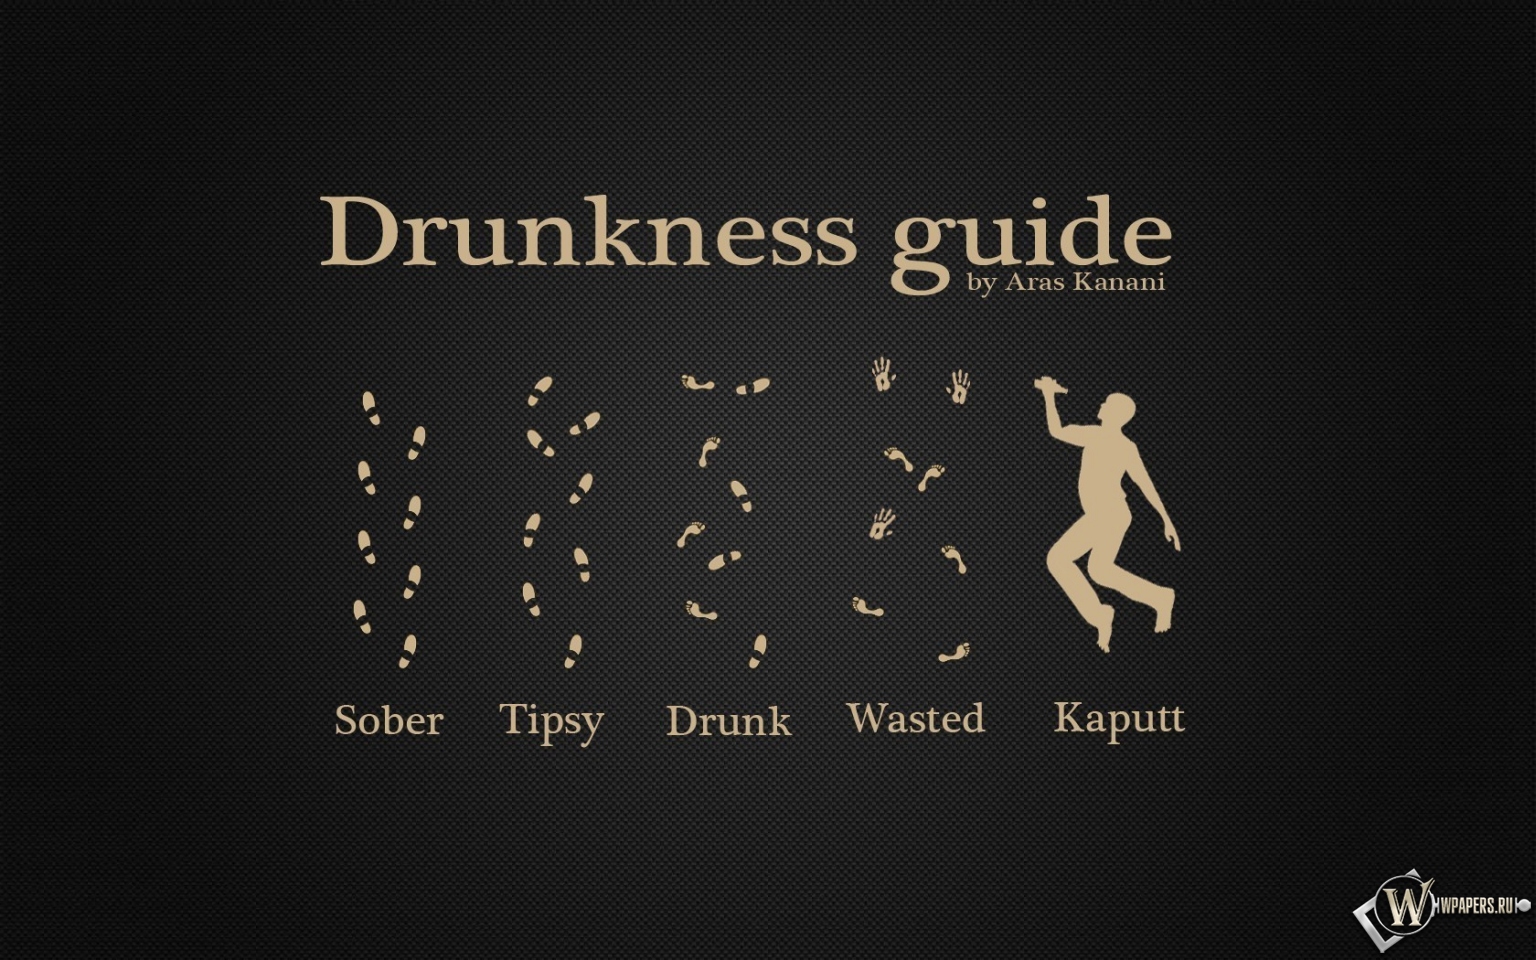 Drunkness Guide 1536x960